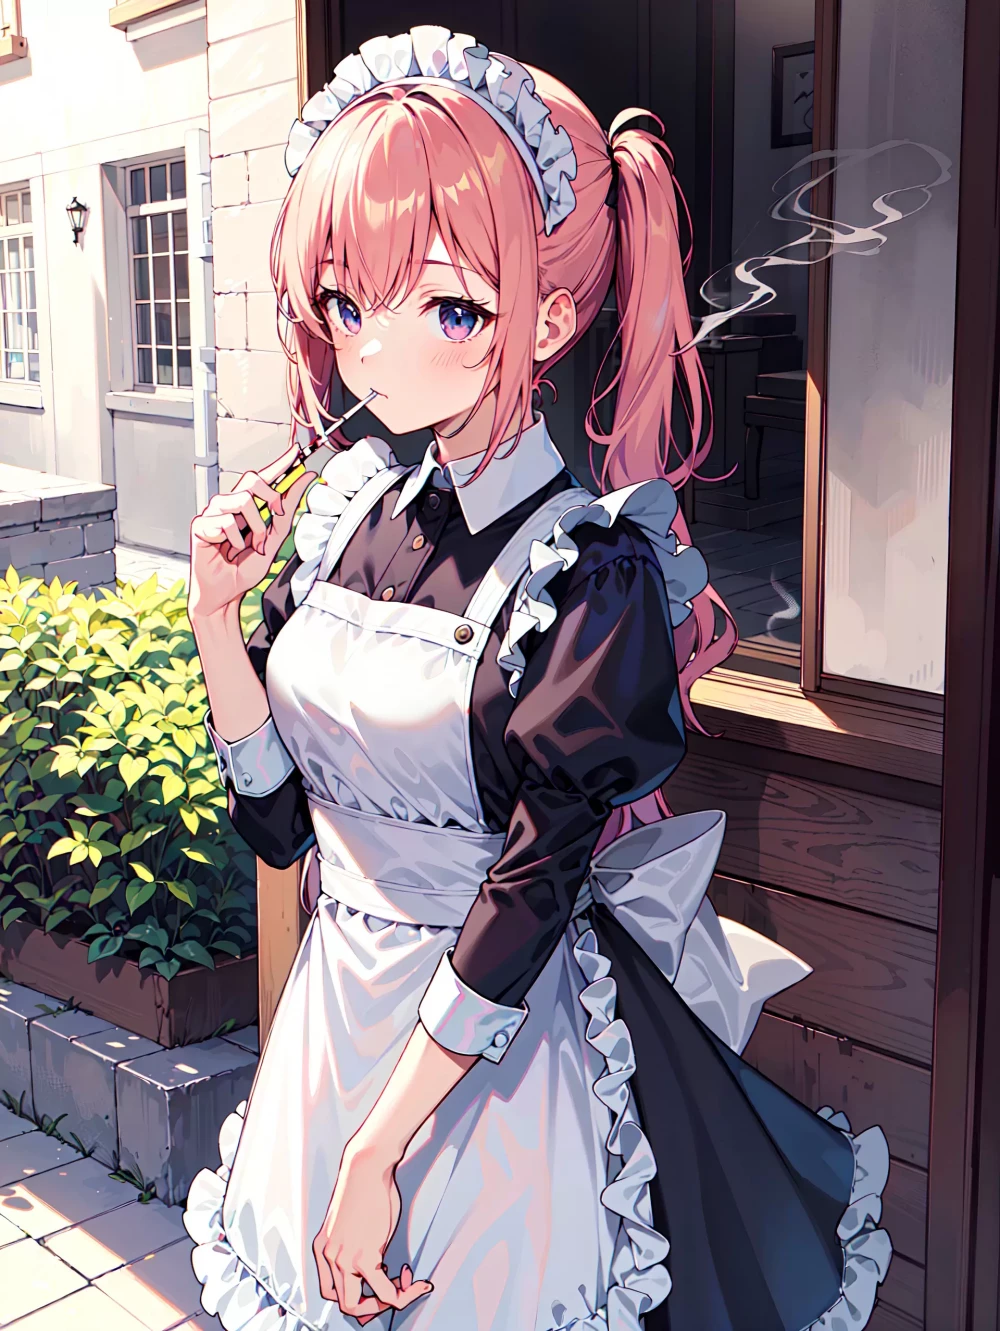 maid-anime-style-all-ages-15